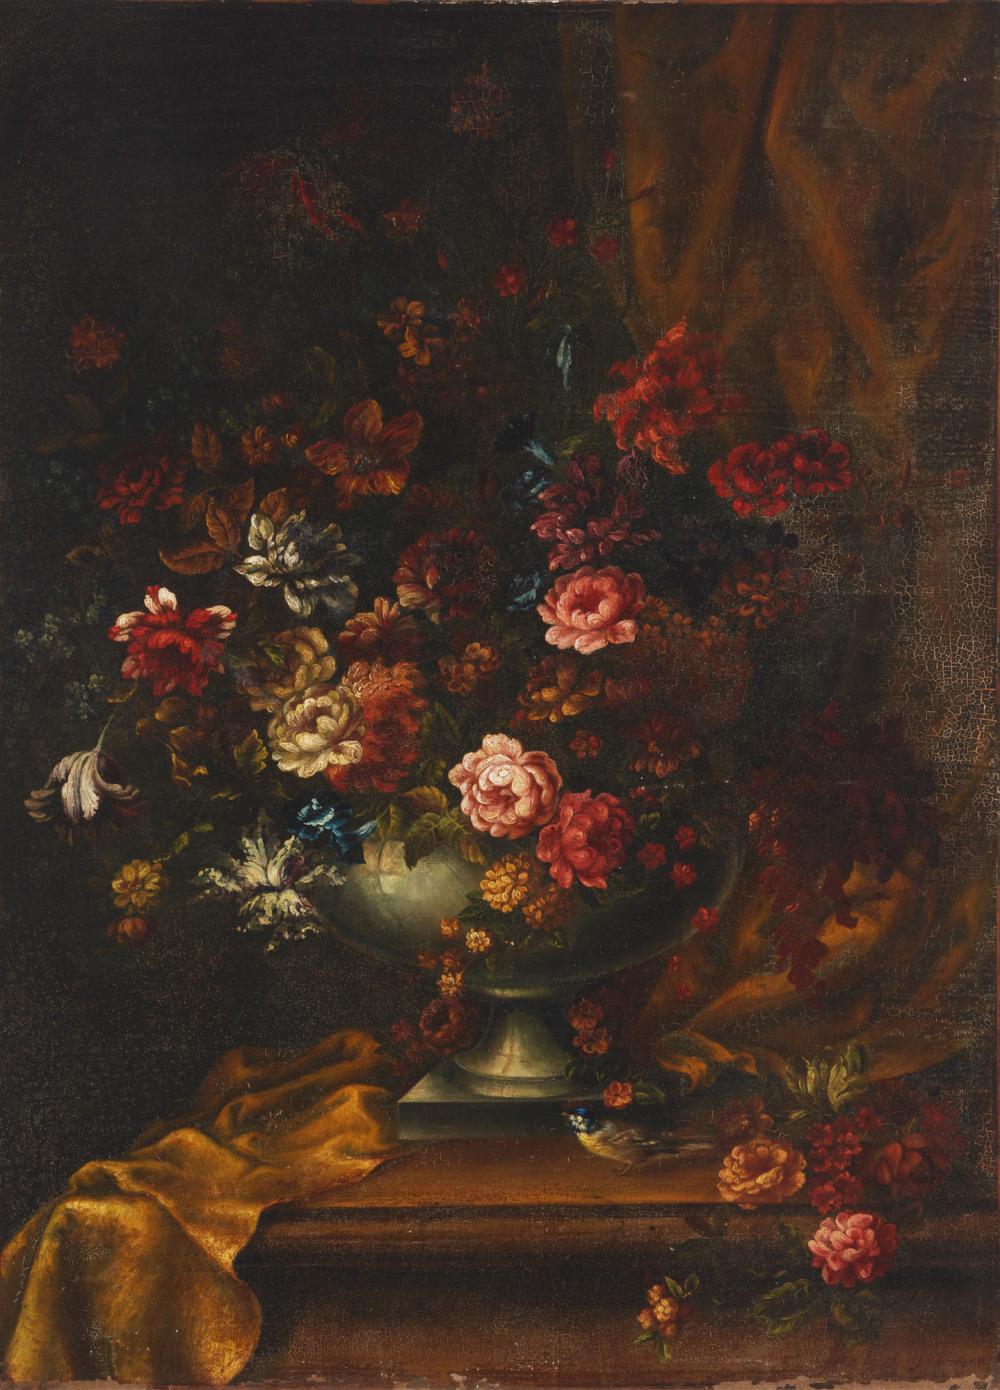 FLORAL STILL LIFE WITH BIRDFloral